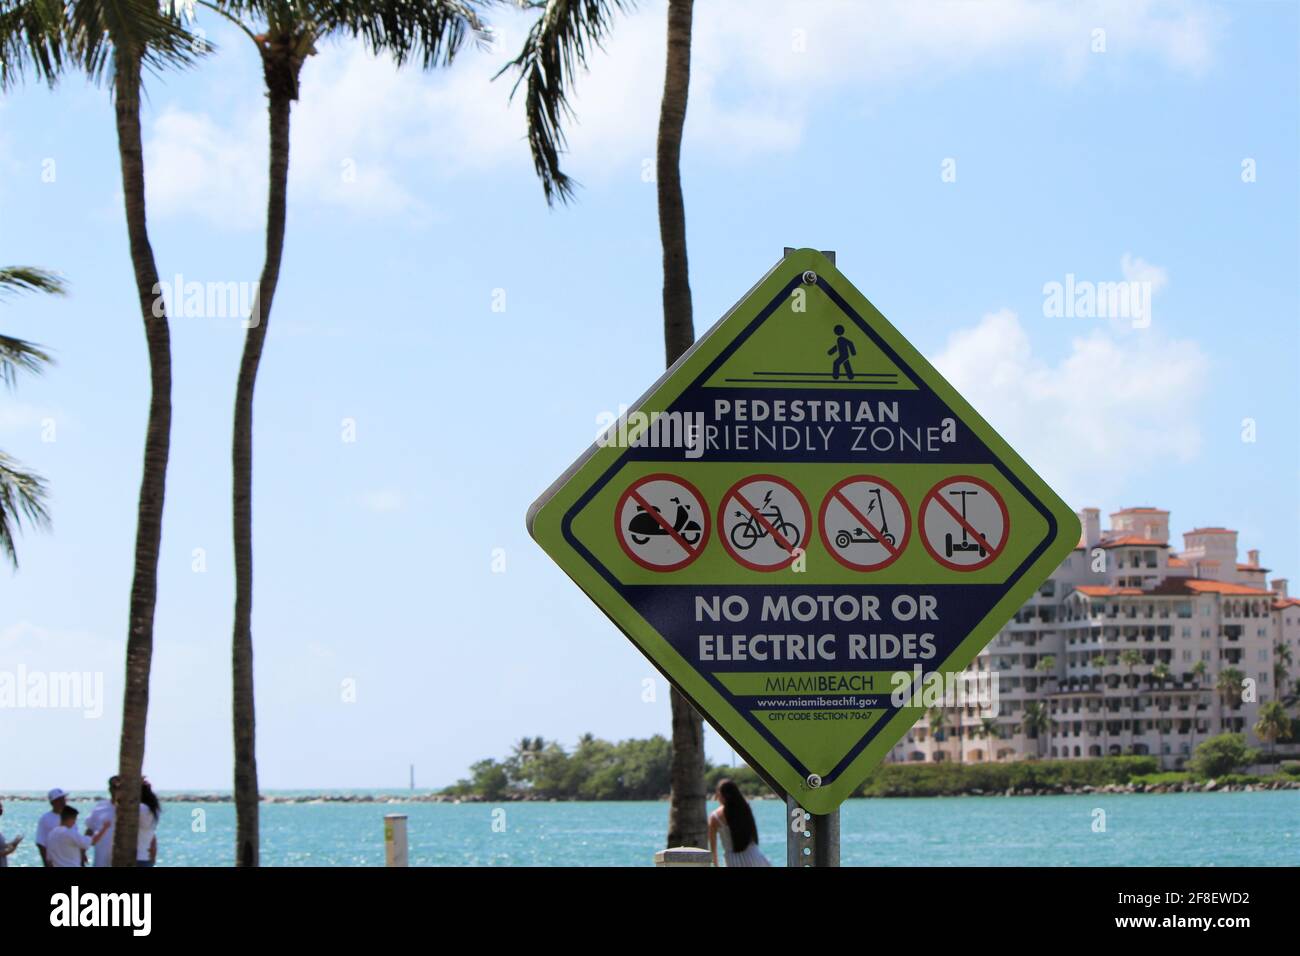 USA: Pedestrian friendly zone sign, no motor or electric rides at South Pointe beach in Miami Beach, Florida with a view of Palazzo Del Sol condominium Stock Photo